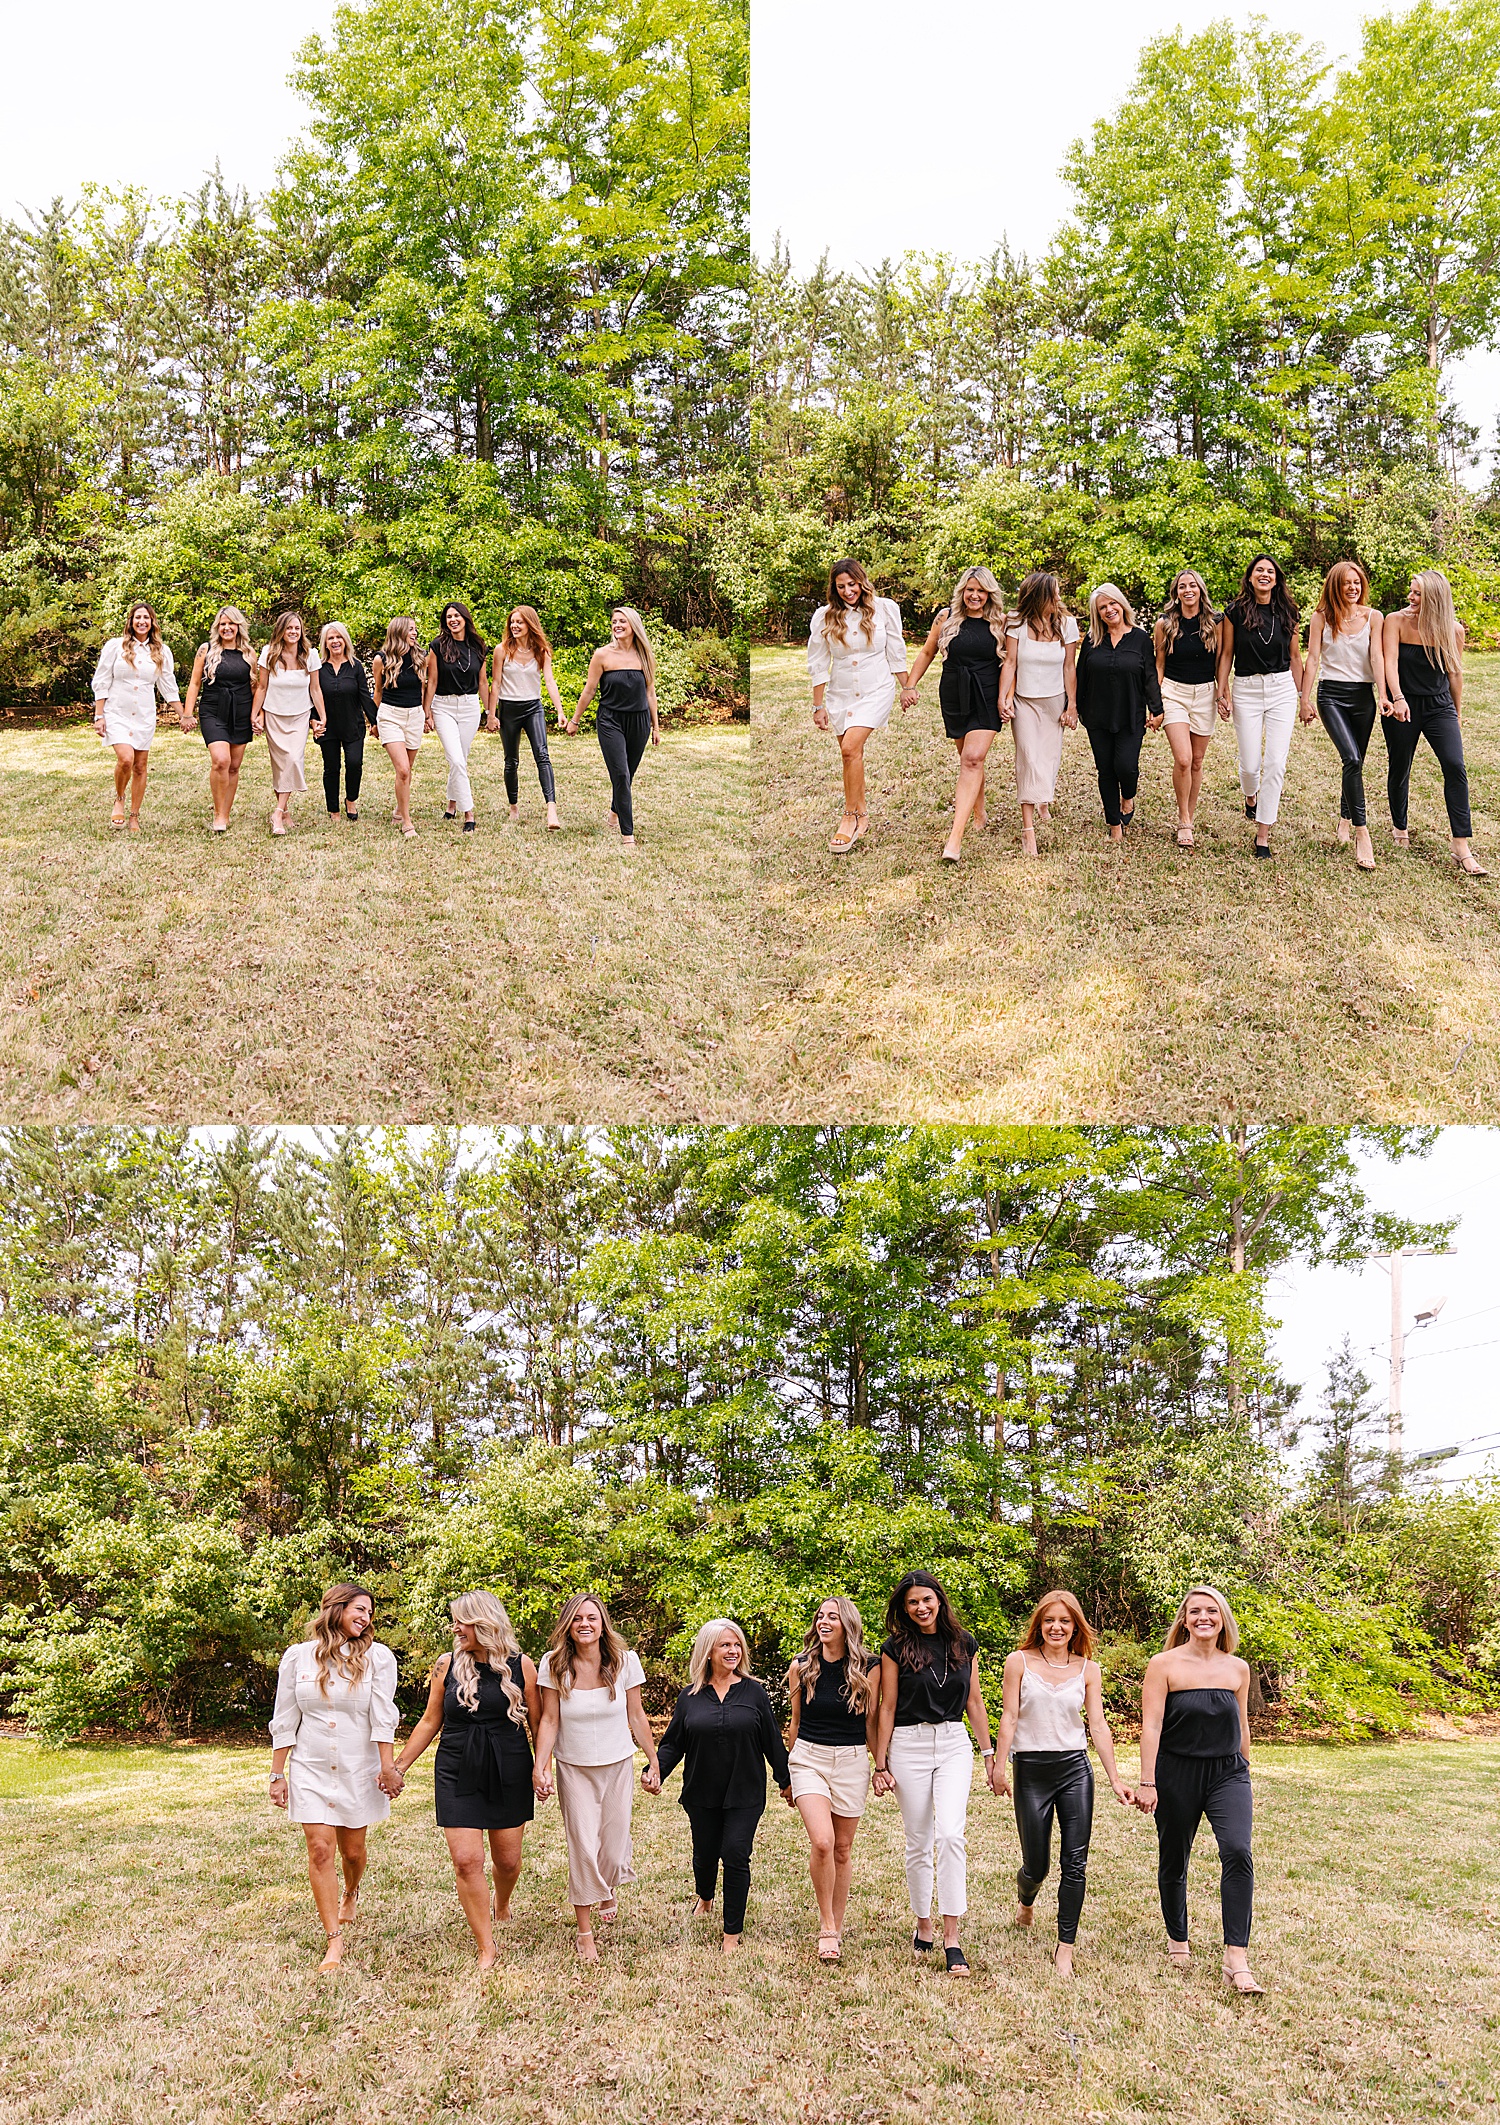 West Village Realty women hold hands and walk through grass for portraits